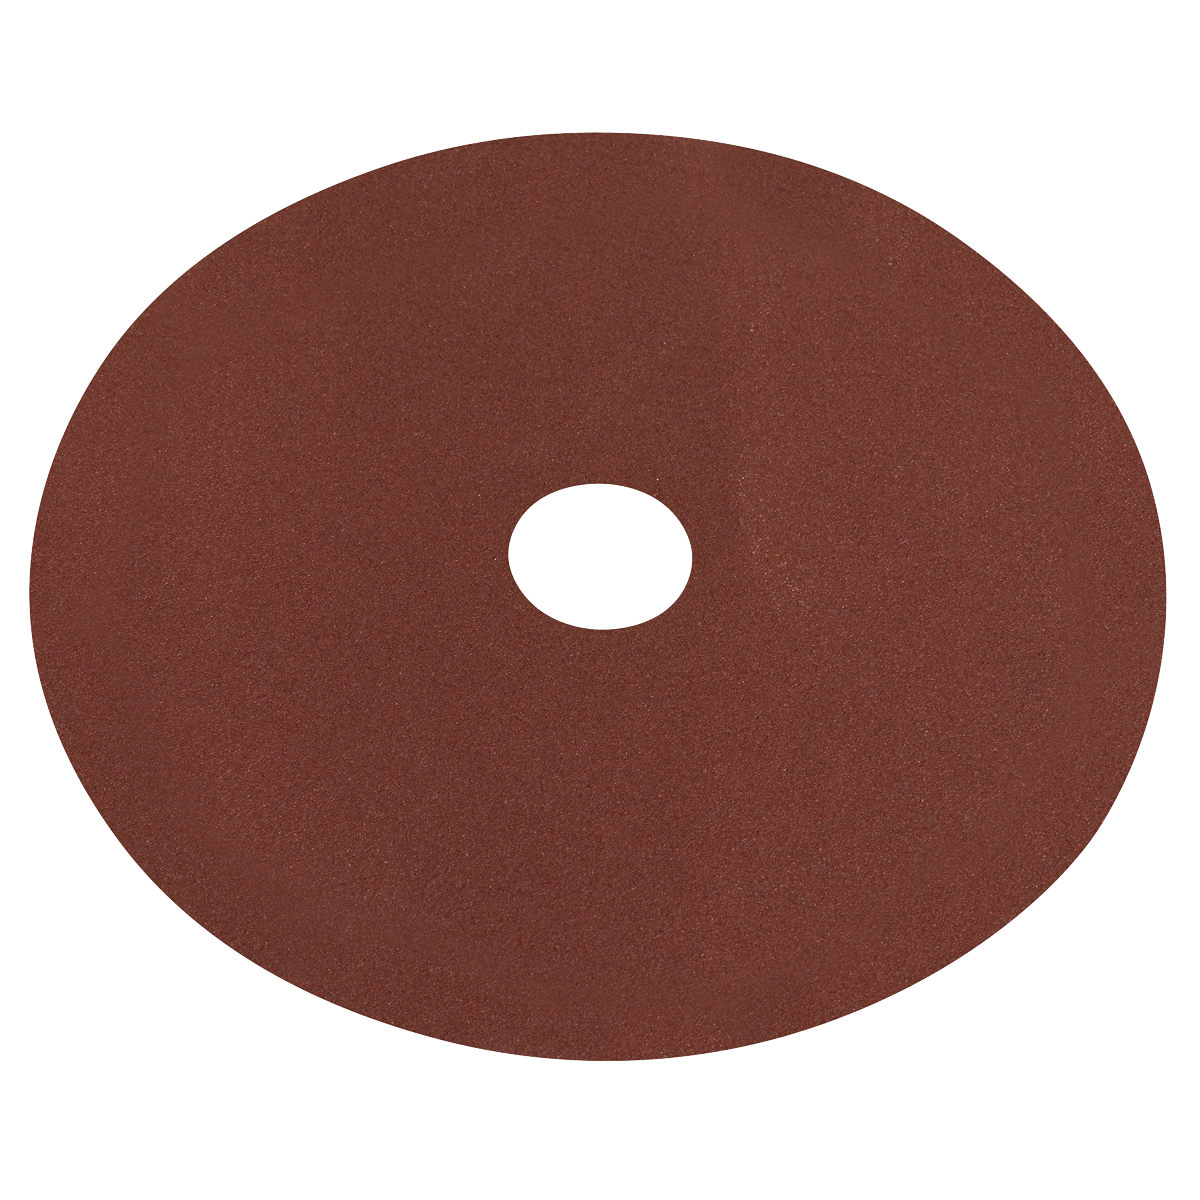 Fibre Backed Disc Ø100mm - 80Grit Pack of 25 - WSD480 - Farming Parts